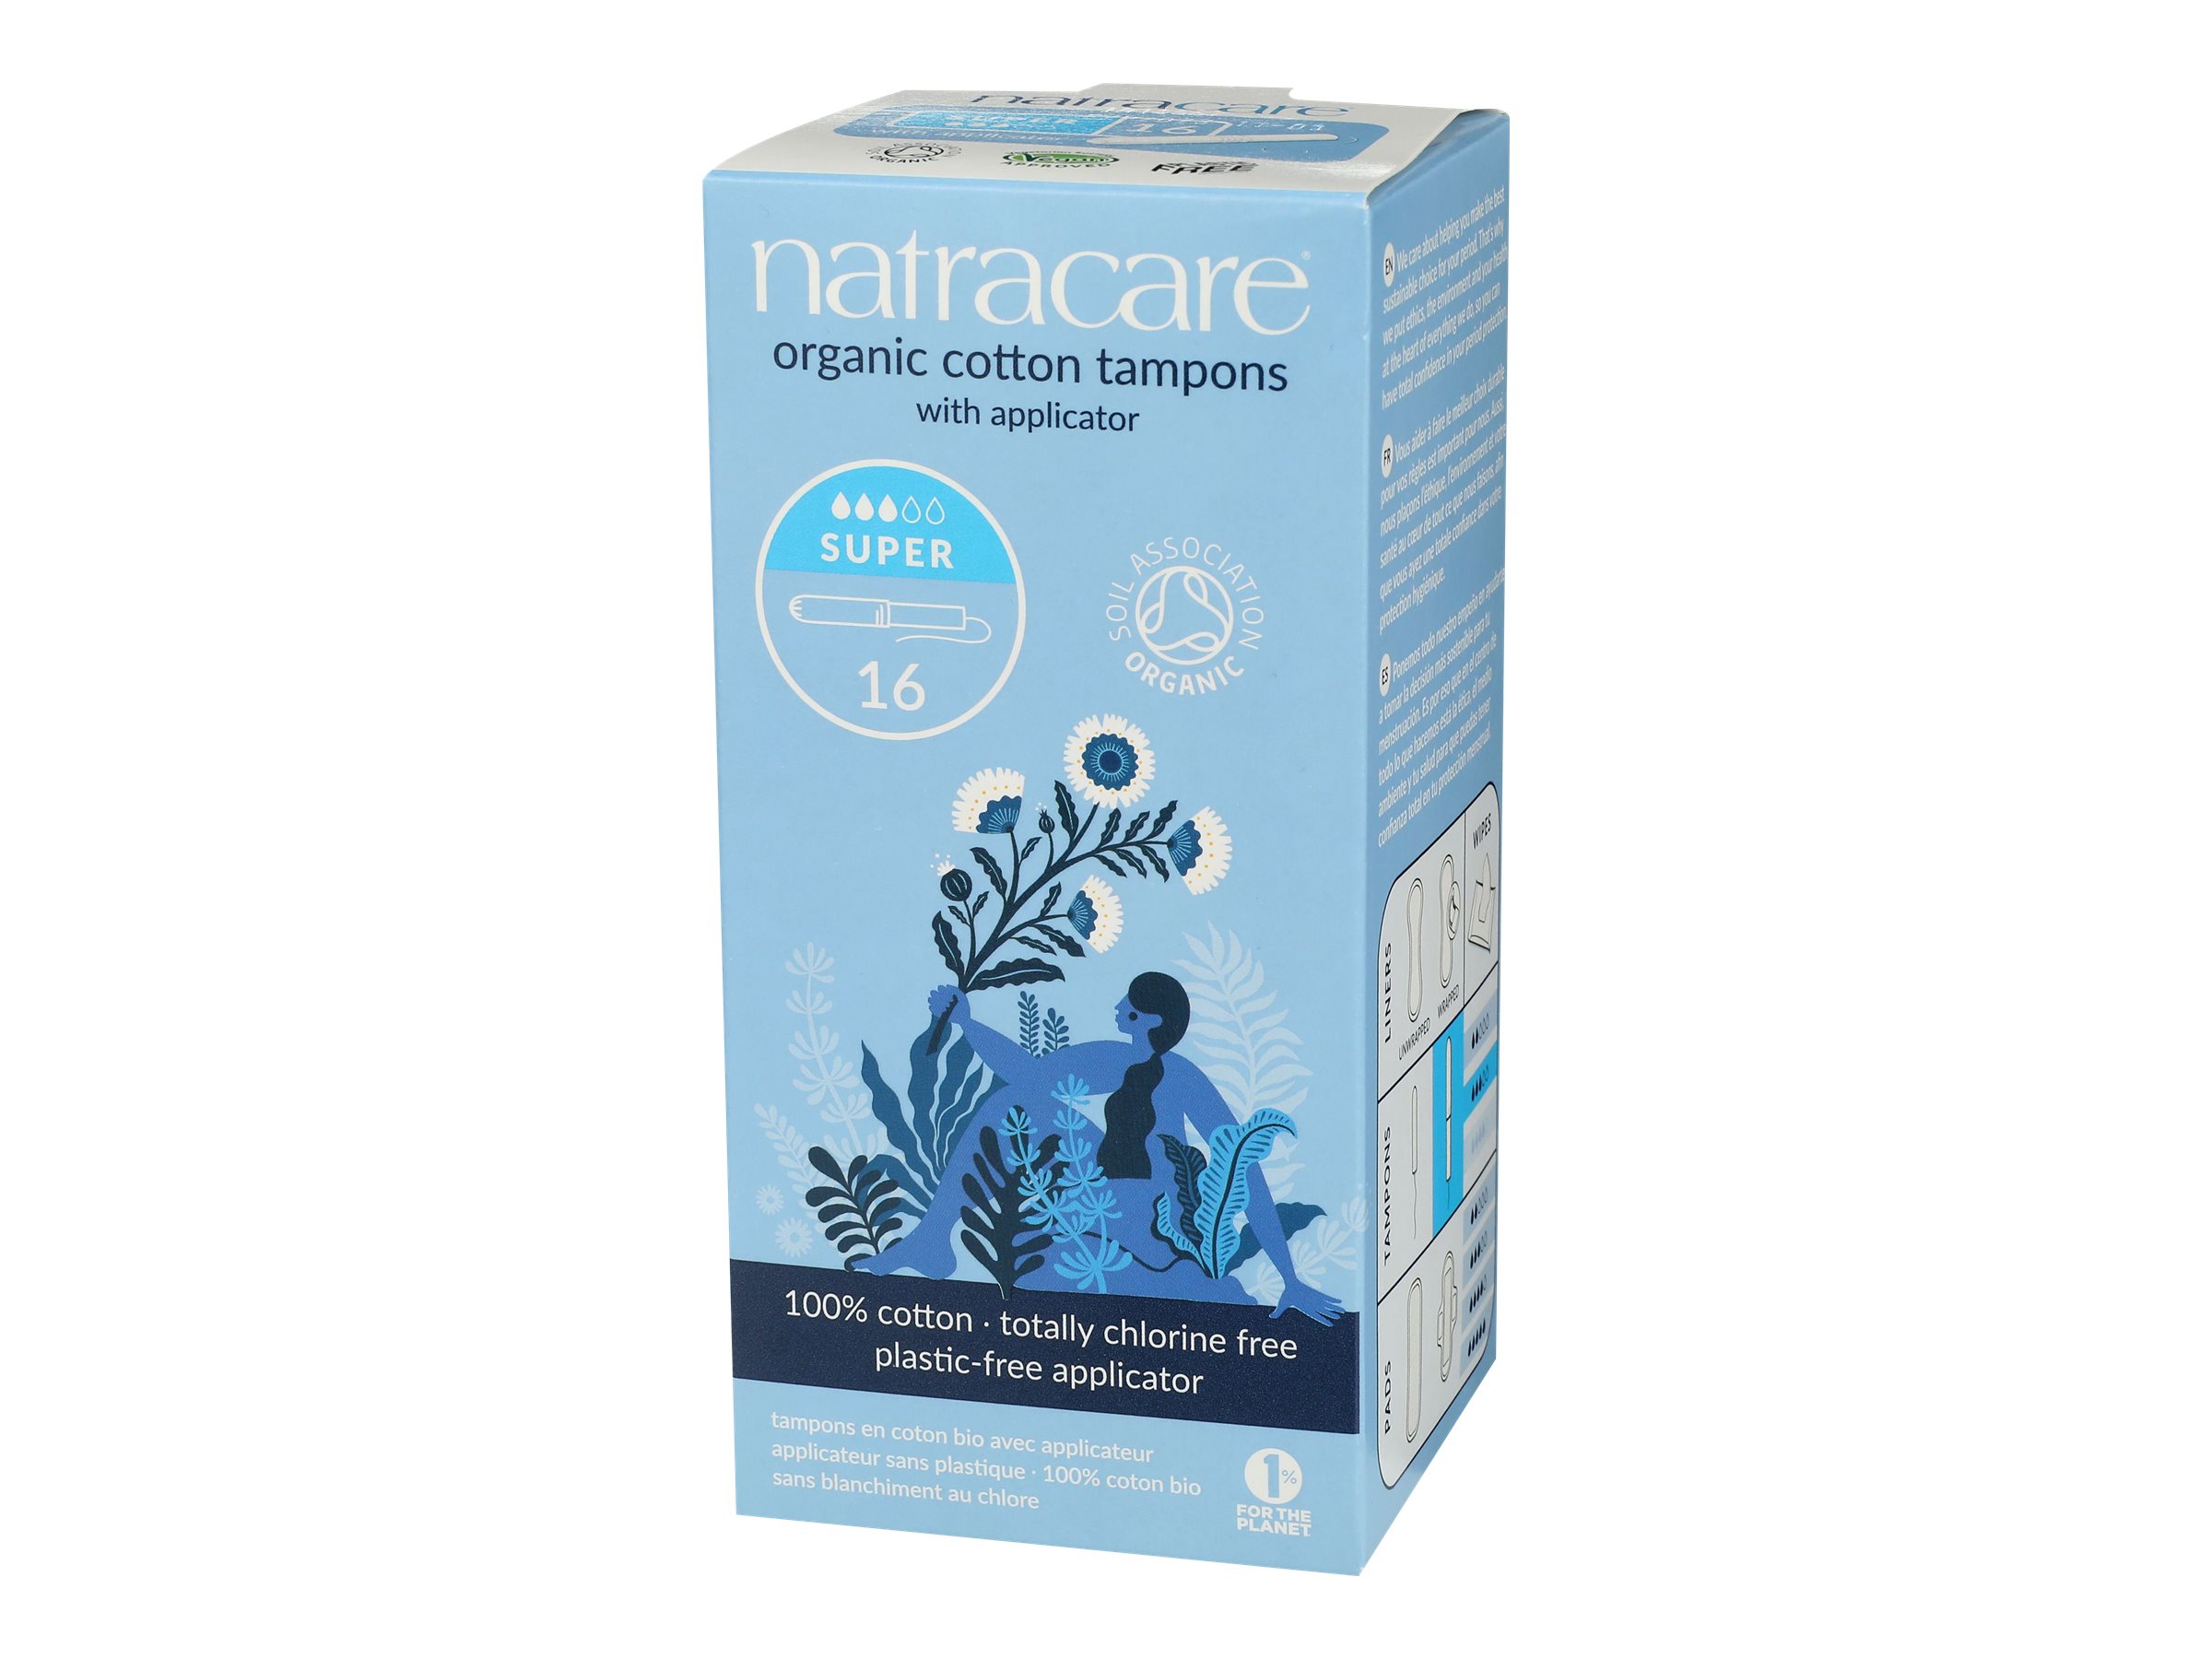 Natracare 100% Certified Organic Cotton Tampons with Applicator - Super - 16s